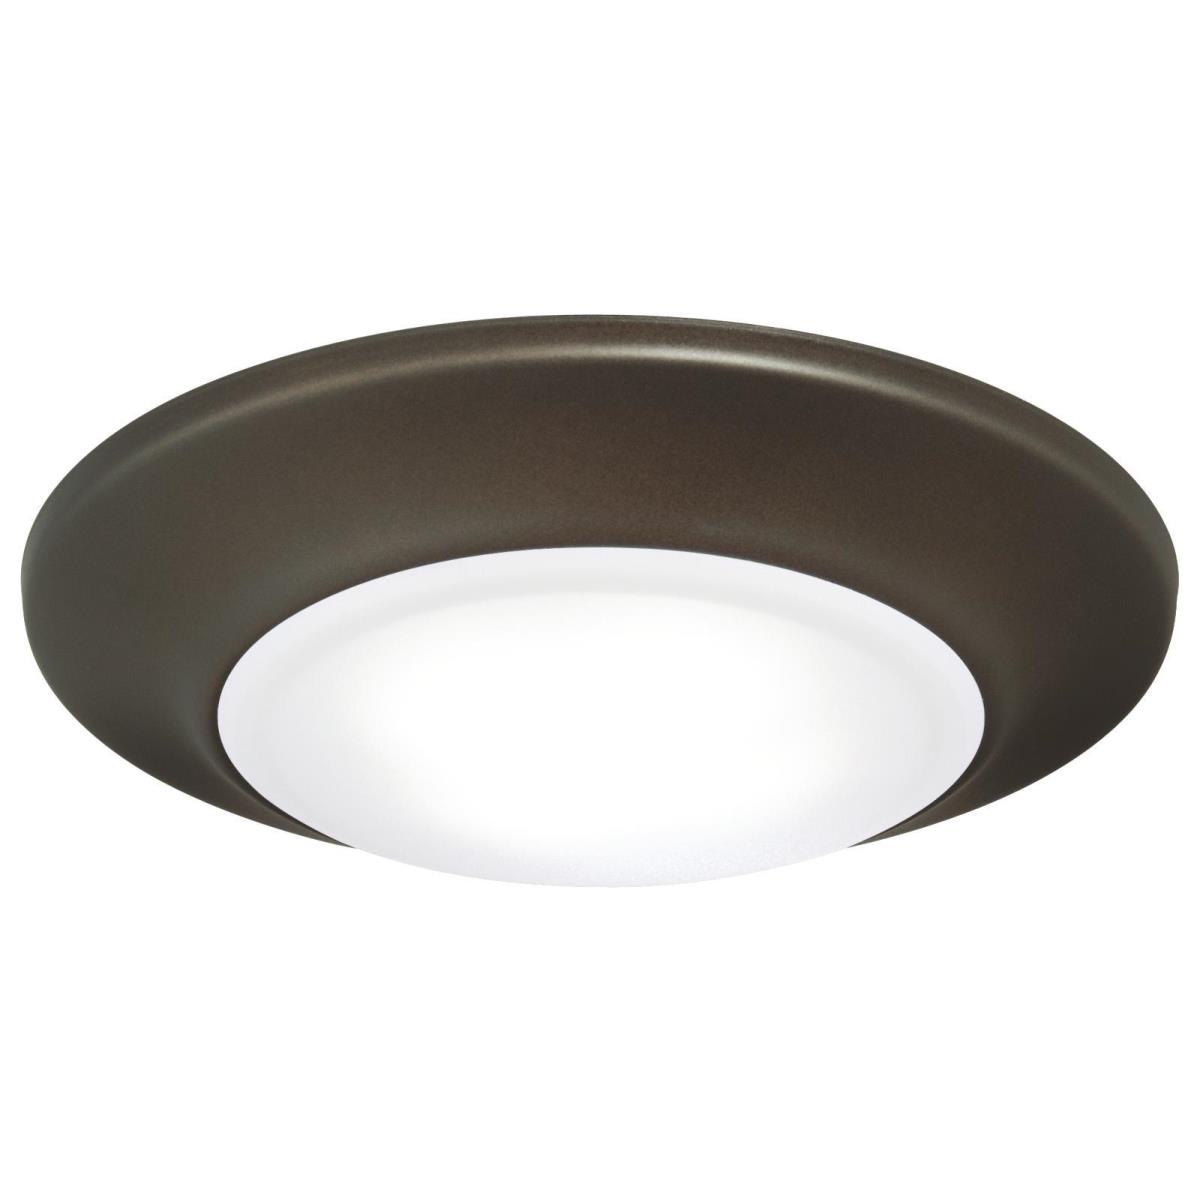 Small LED Surface Mount Oil Rubbed Bronze Finish with Frosted Lens